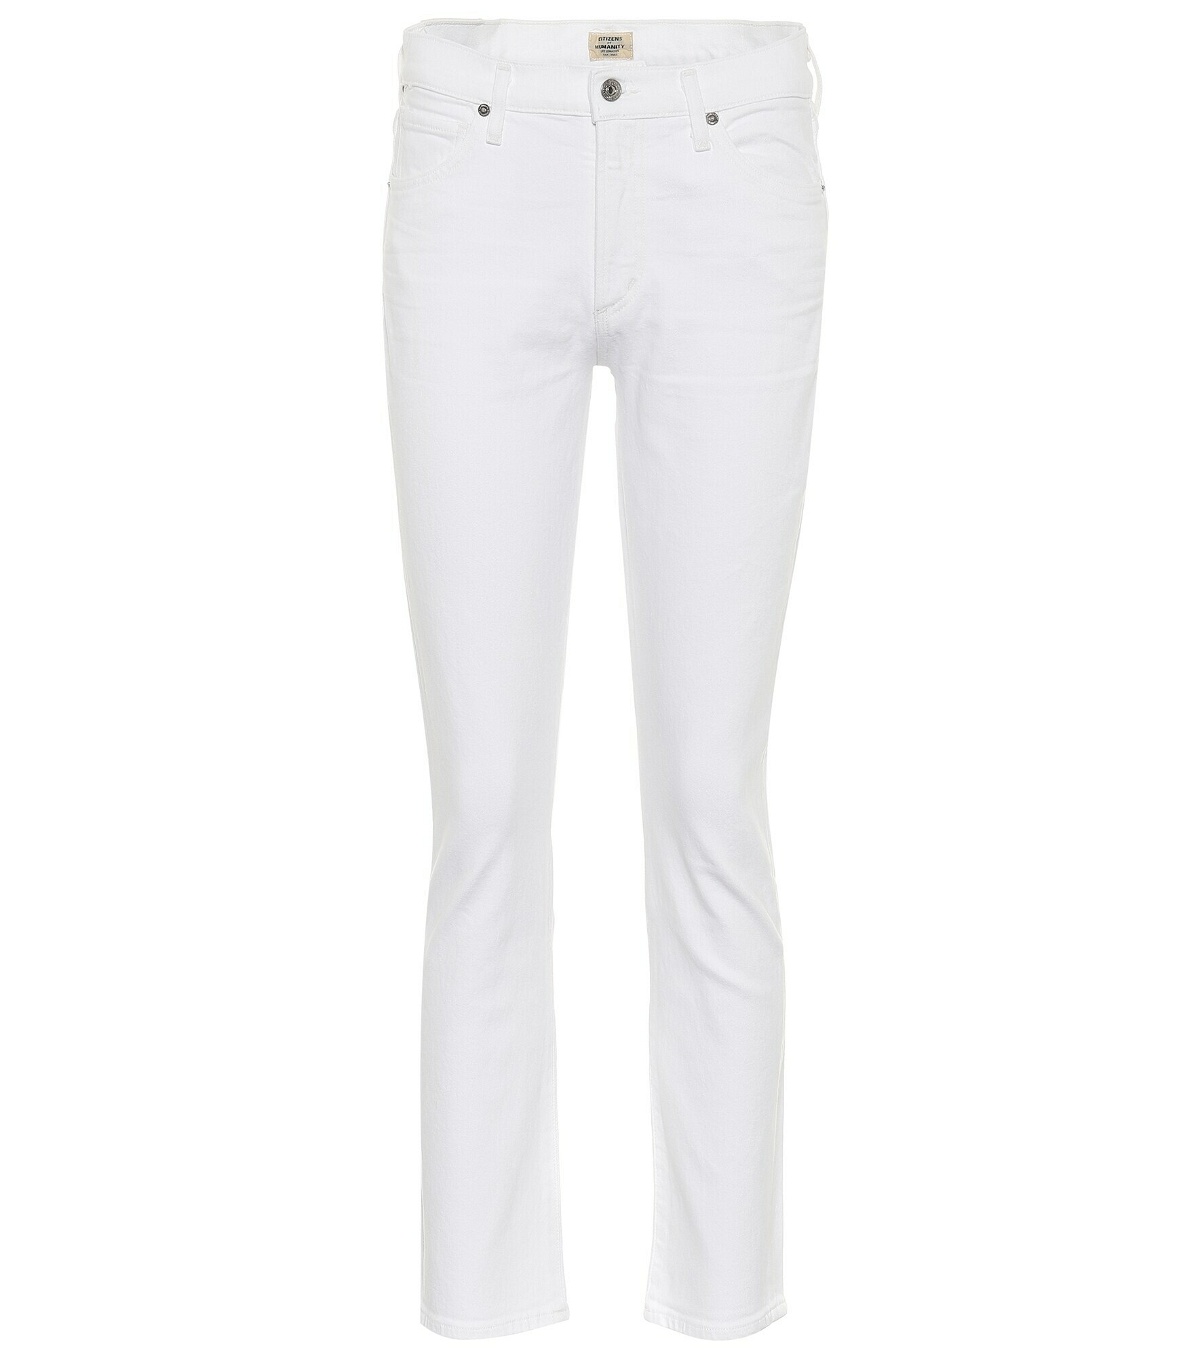 Citizens of Humanity - Skyla mid-rise skinny jeans Citizens of Humanity